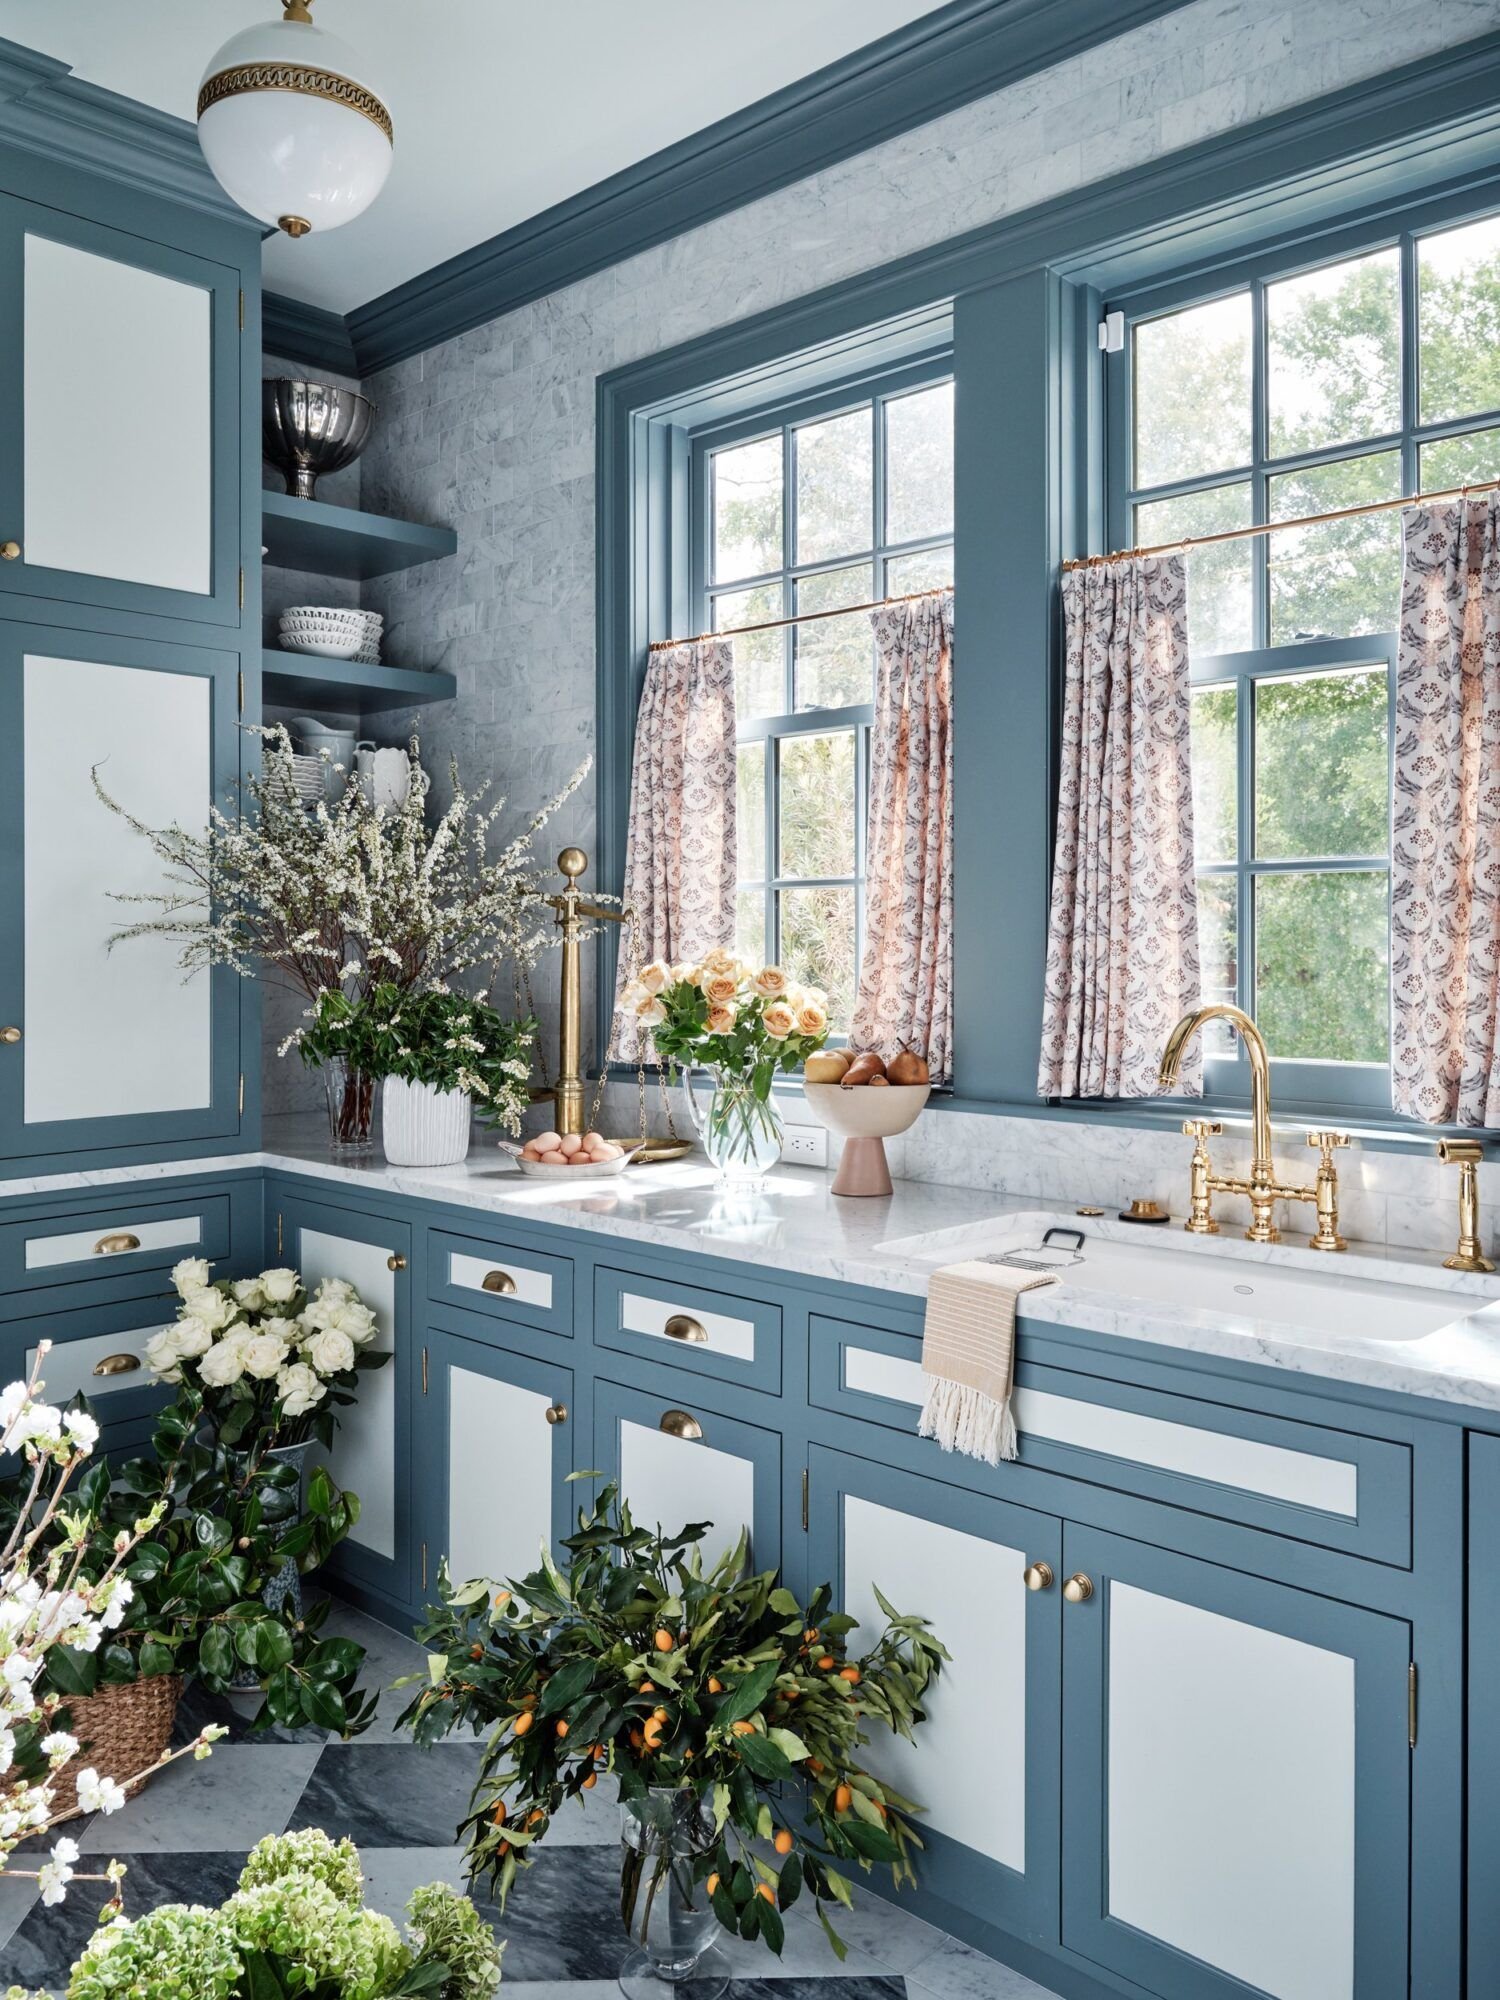 More two-toned cabinets, love the window treatments, and overall layout.